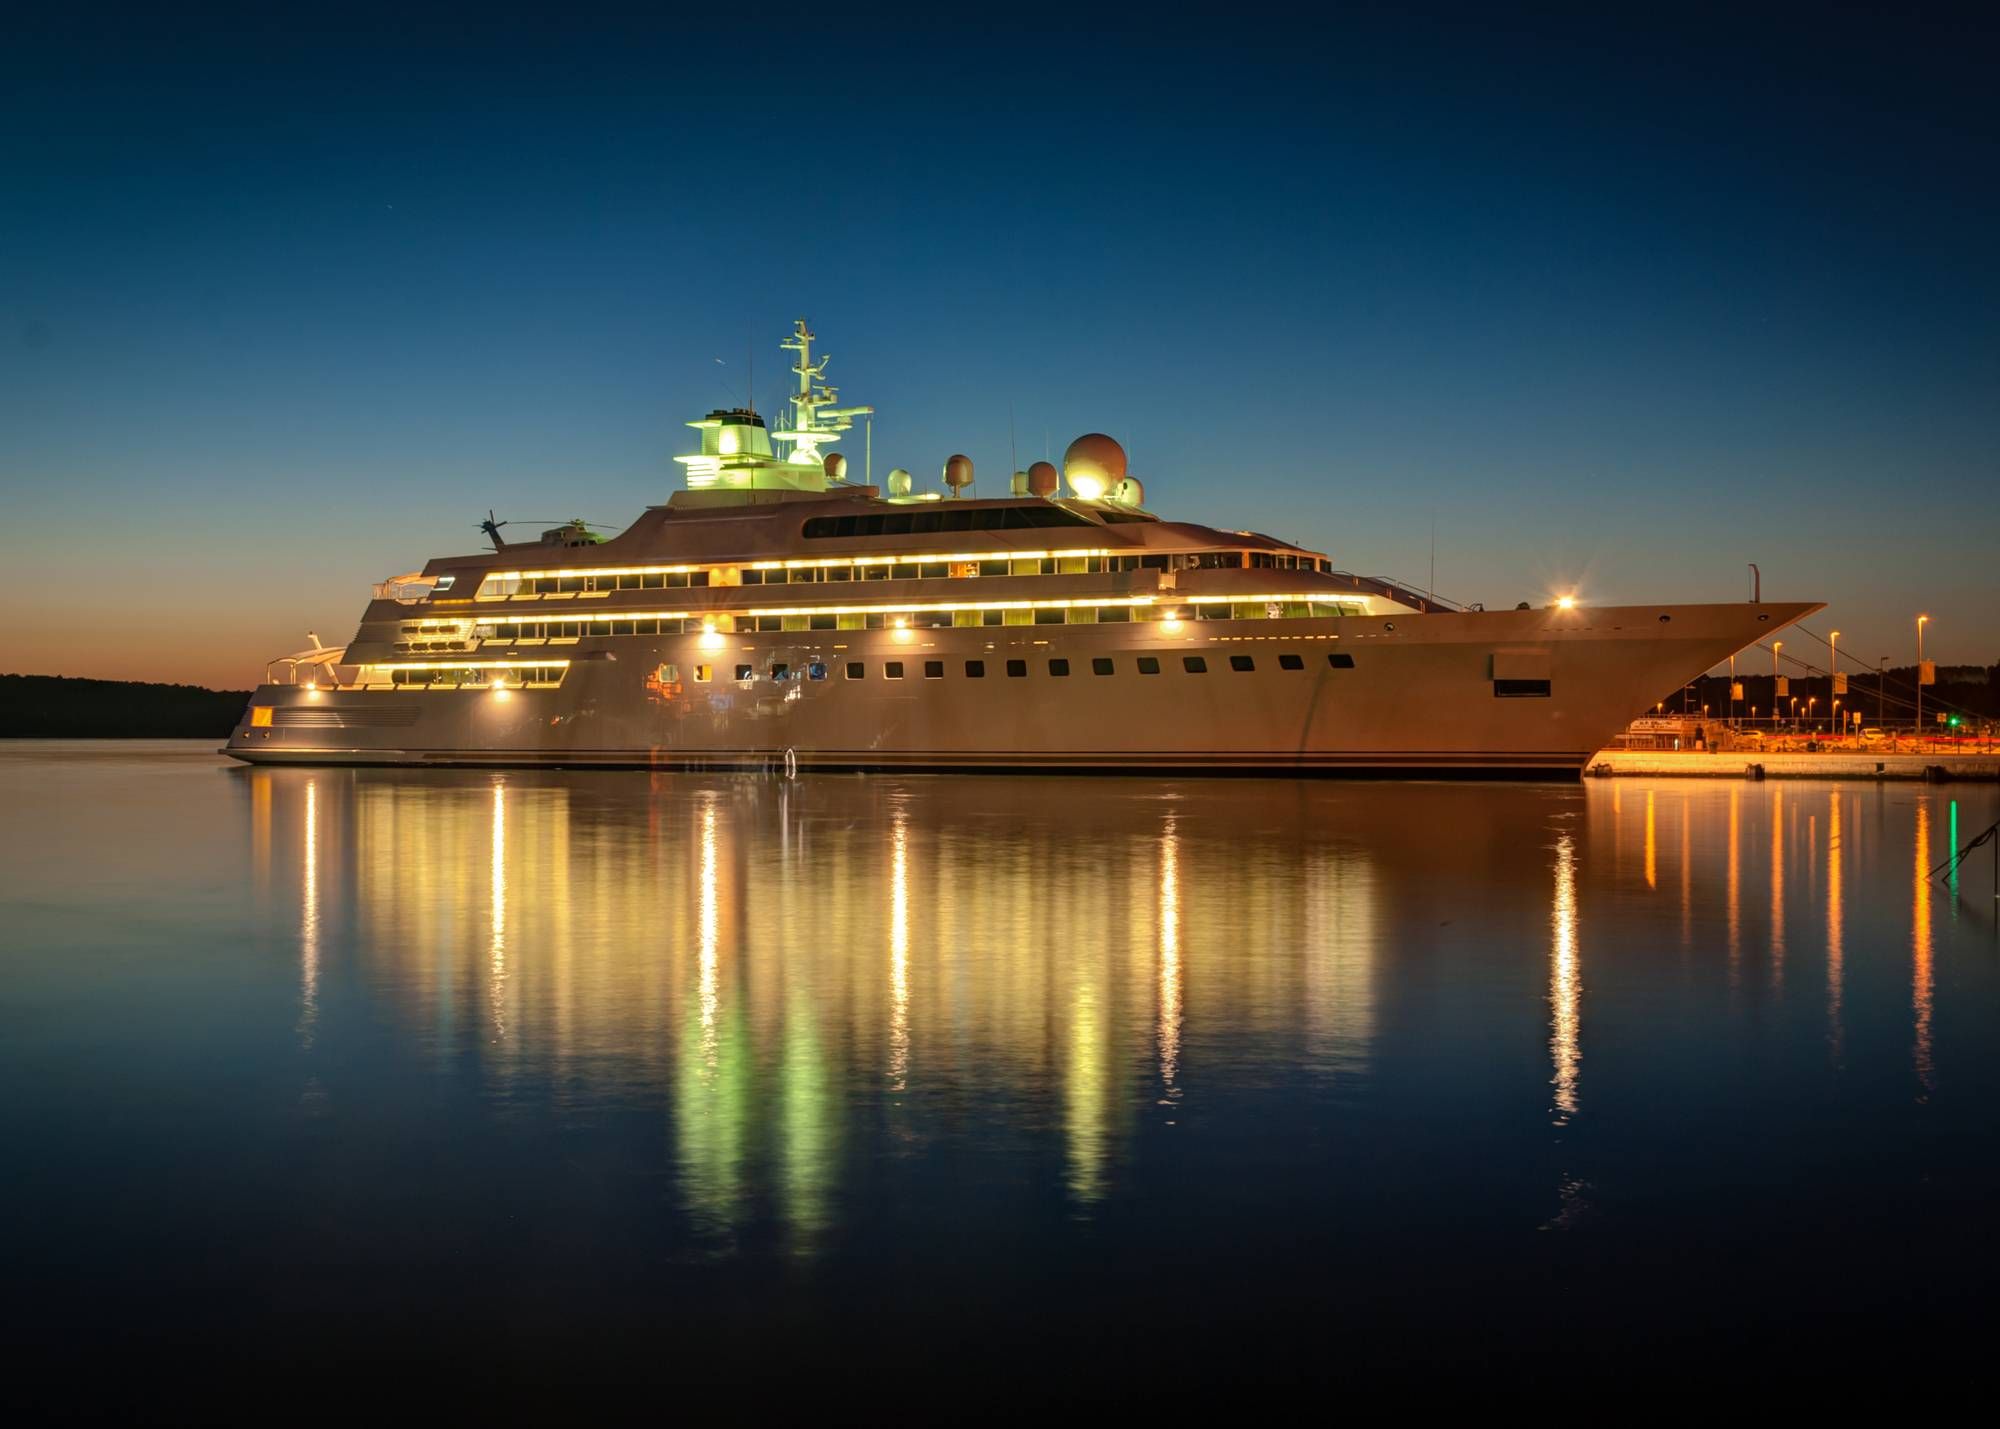 Princess Cruise Lines allegedly caused some of their passengers to get the coronavirus.